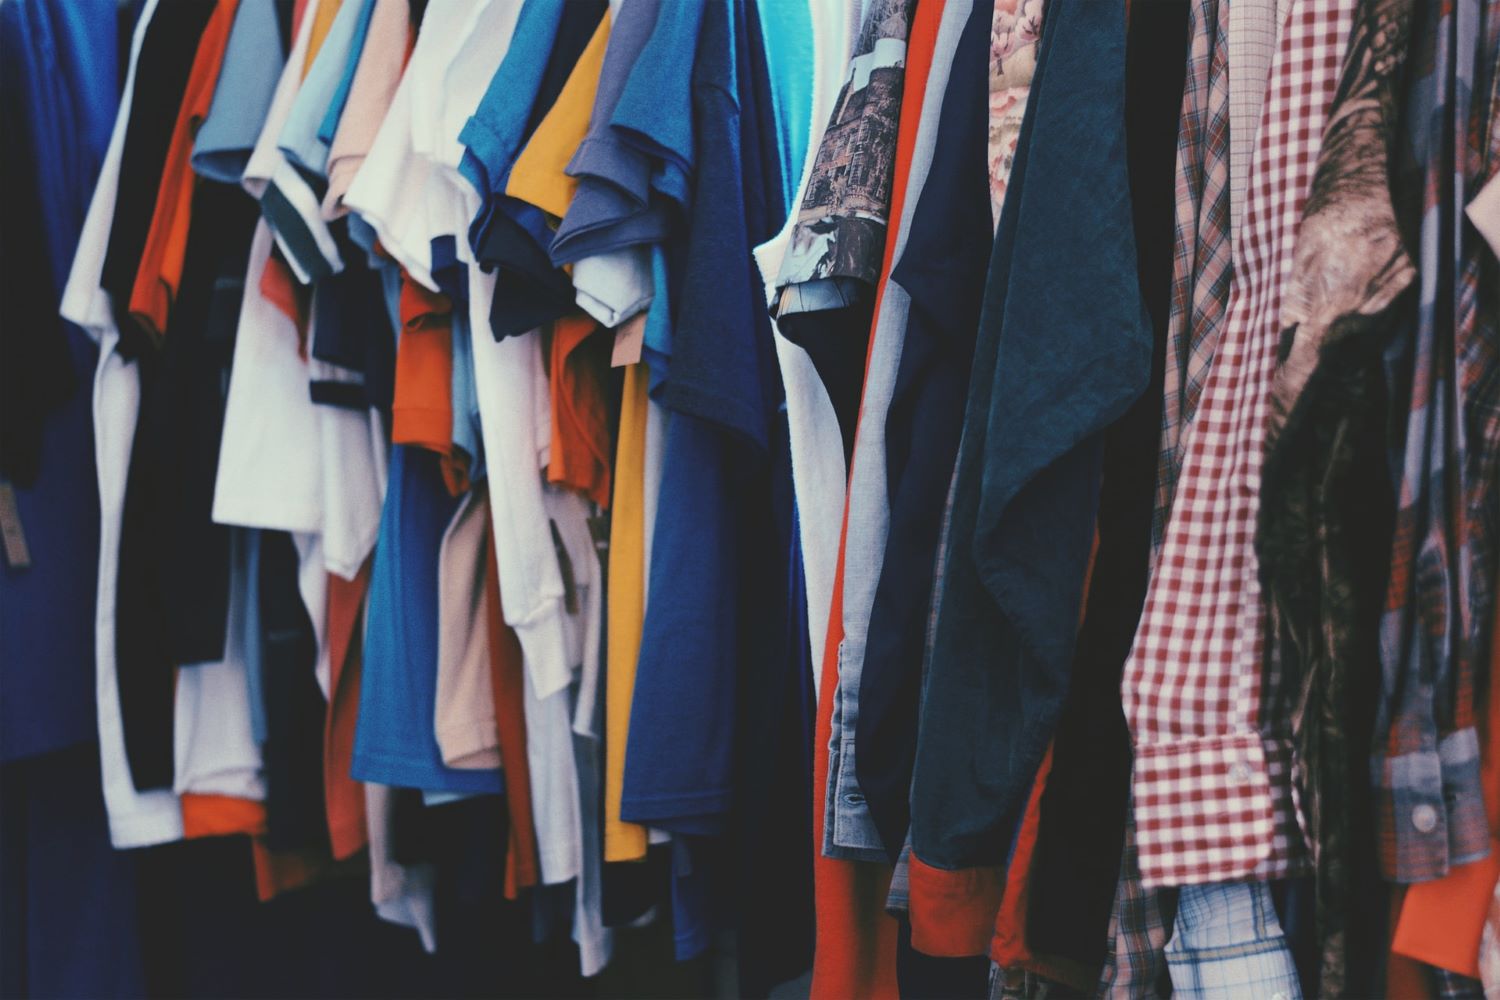 line-up of clothes